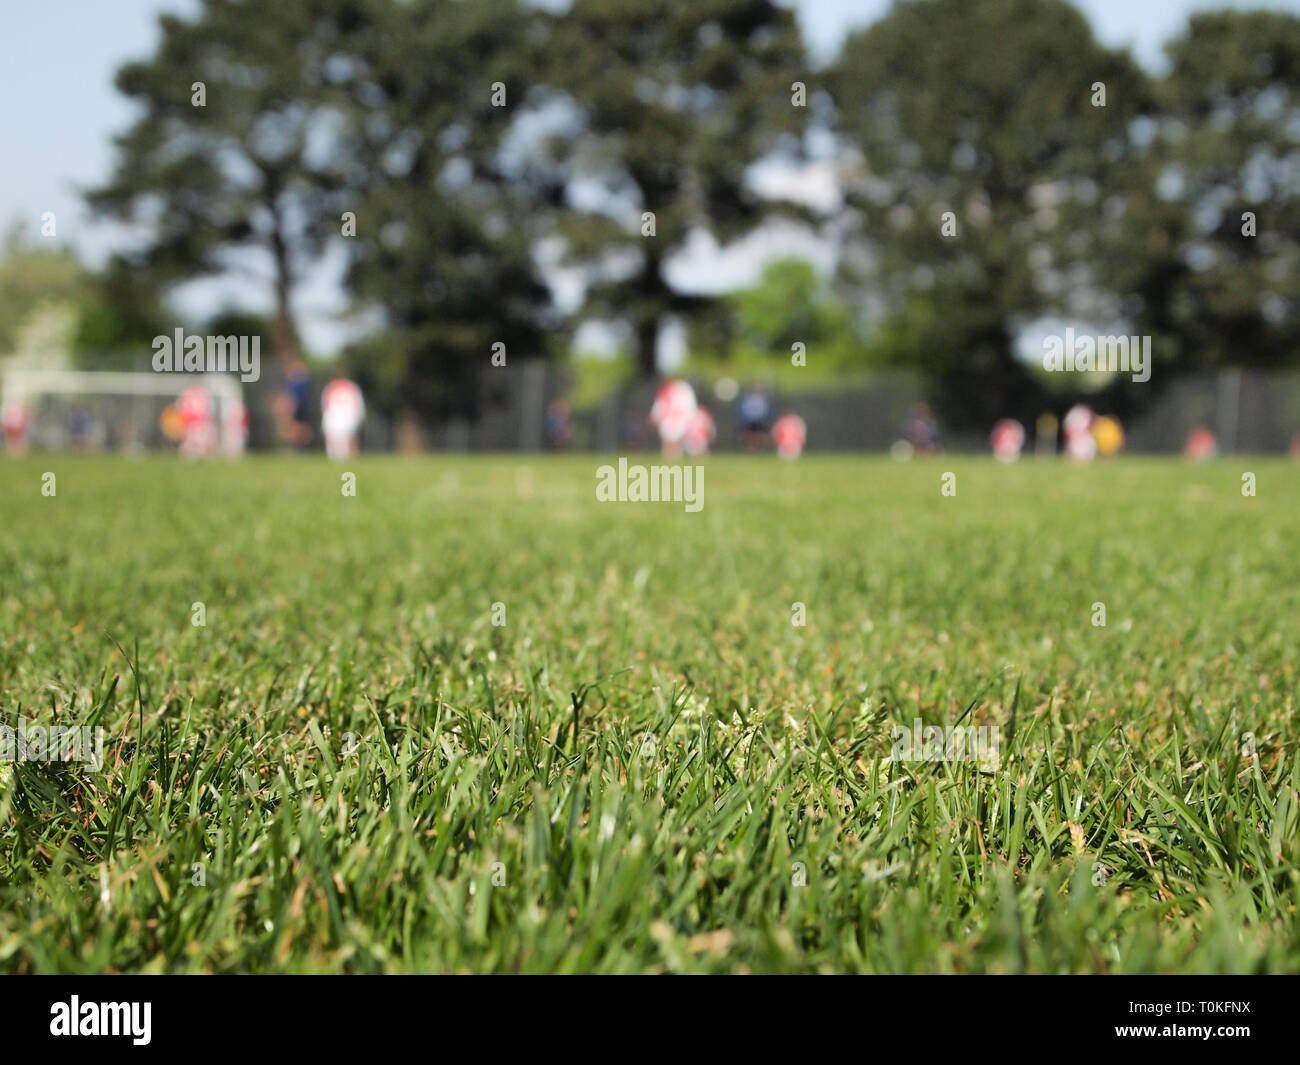 A grass football pitch with a game taking place out of focus in the background Stock Photo